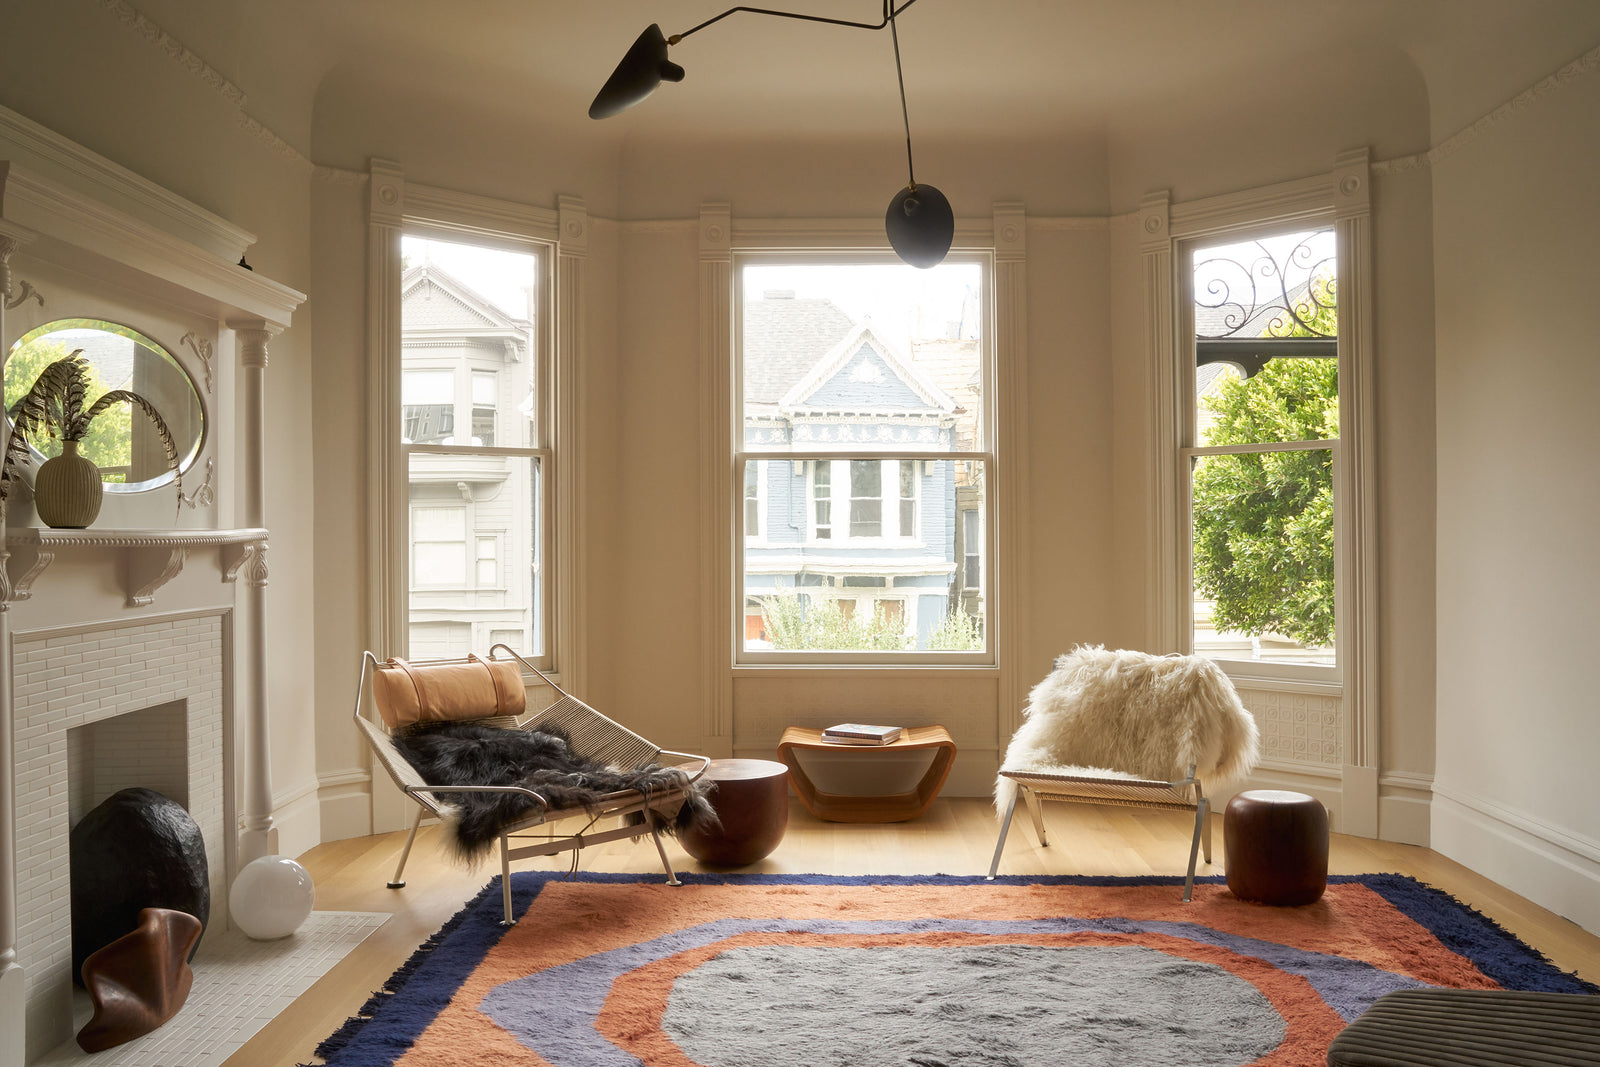 How to Choose the Right Rug - How to Decorate